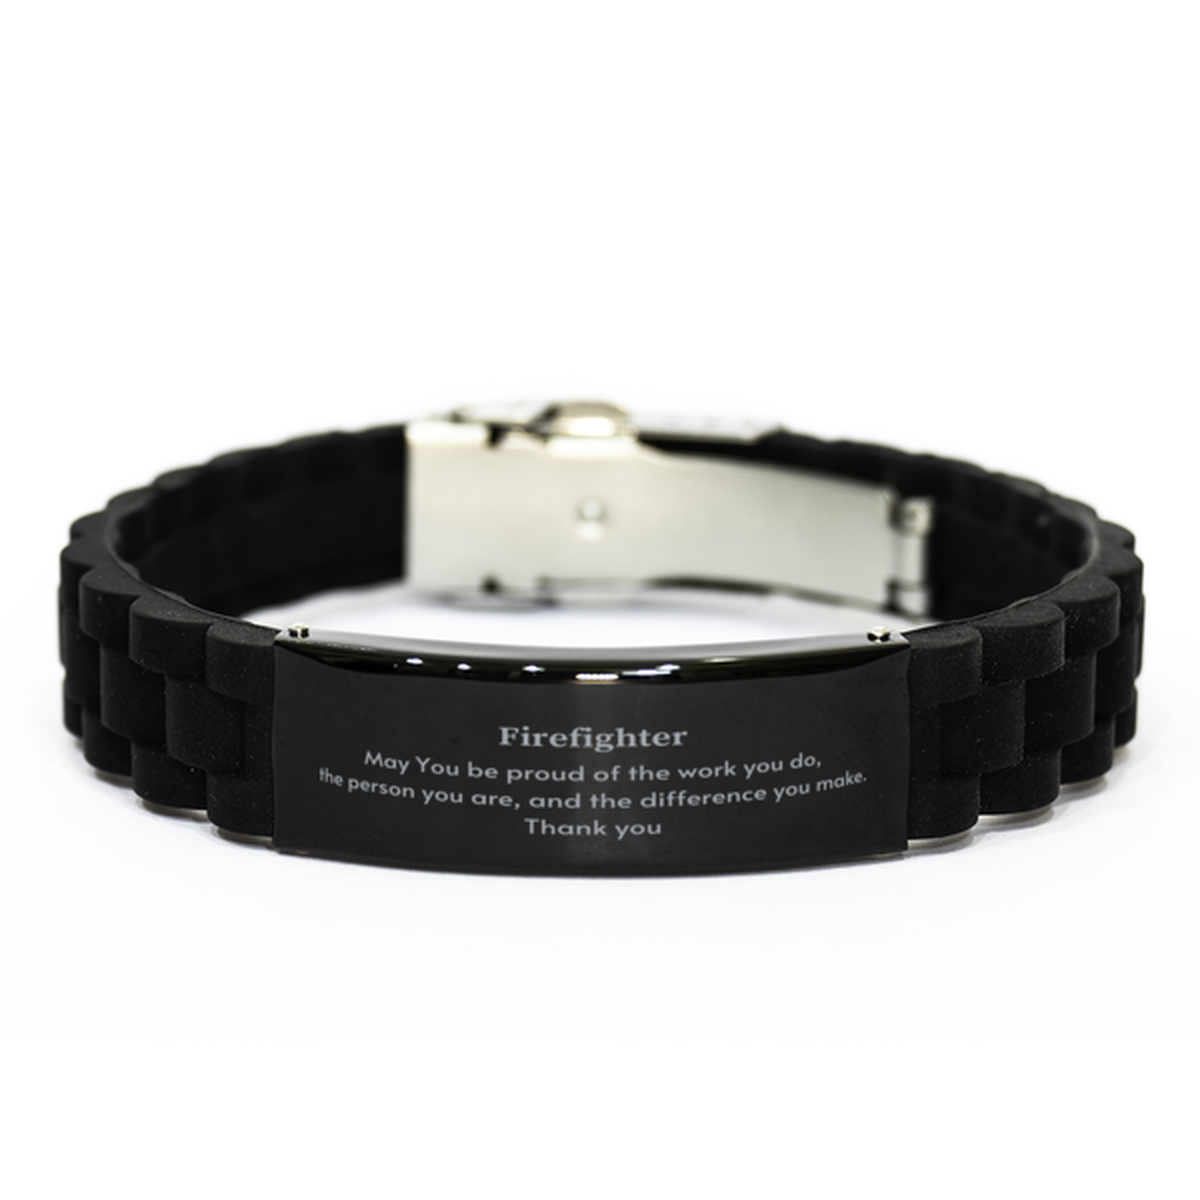 Heartwarming Black Glidelock Clasp Bracelet Retirement Coworkers Gifts for Firefighter, Firefighter May You be proud of the work you do, the person you are Gifts for Boss Men Women Friends